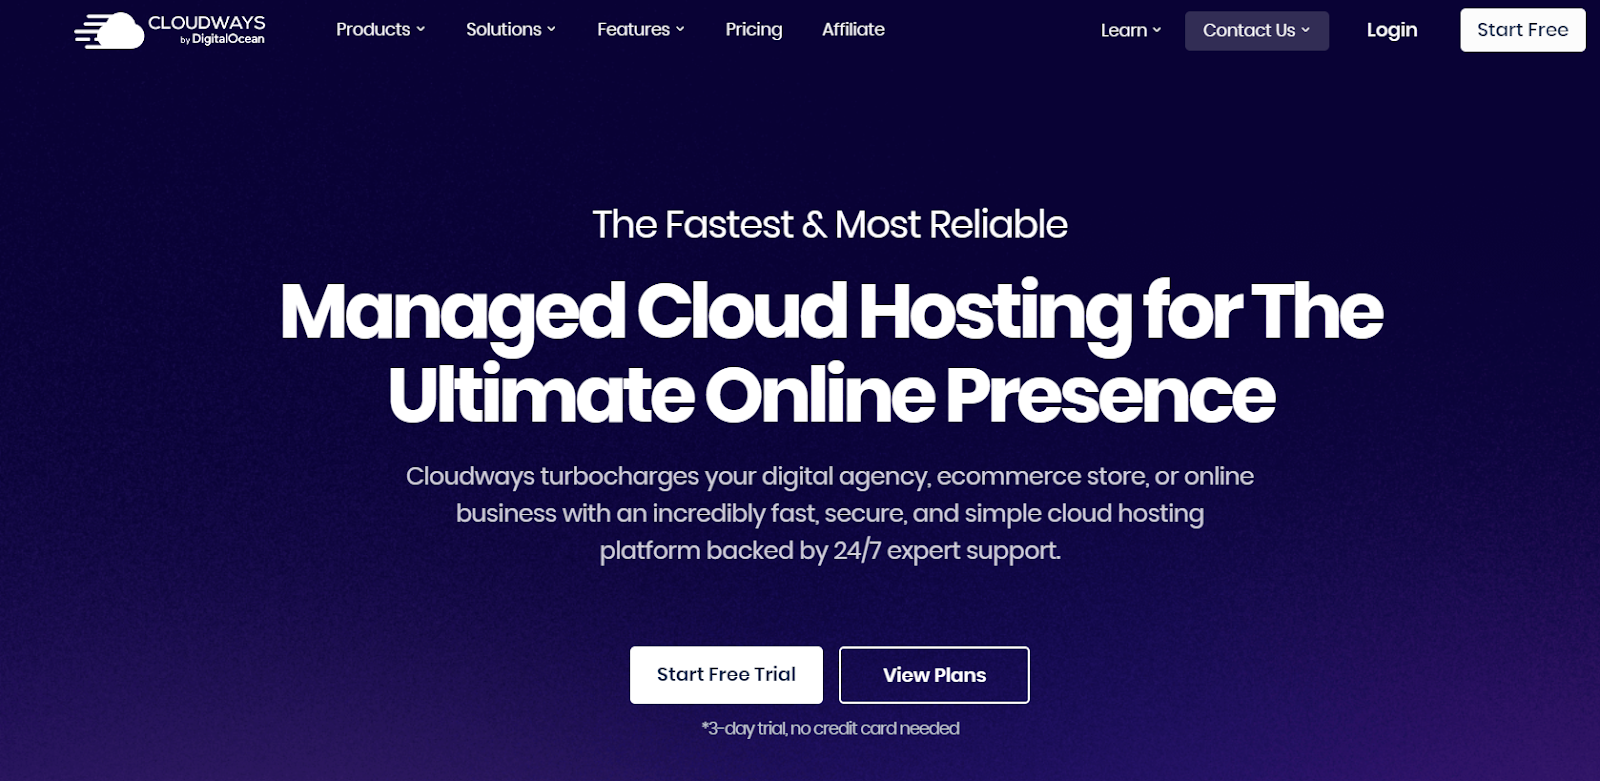 Cloudways' home page